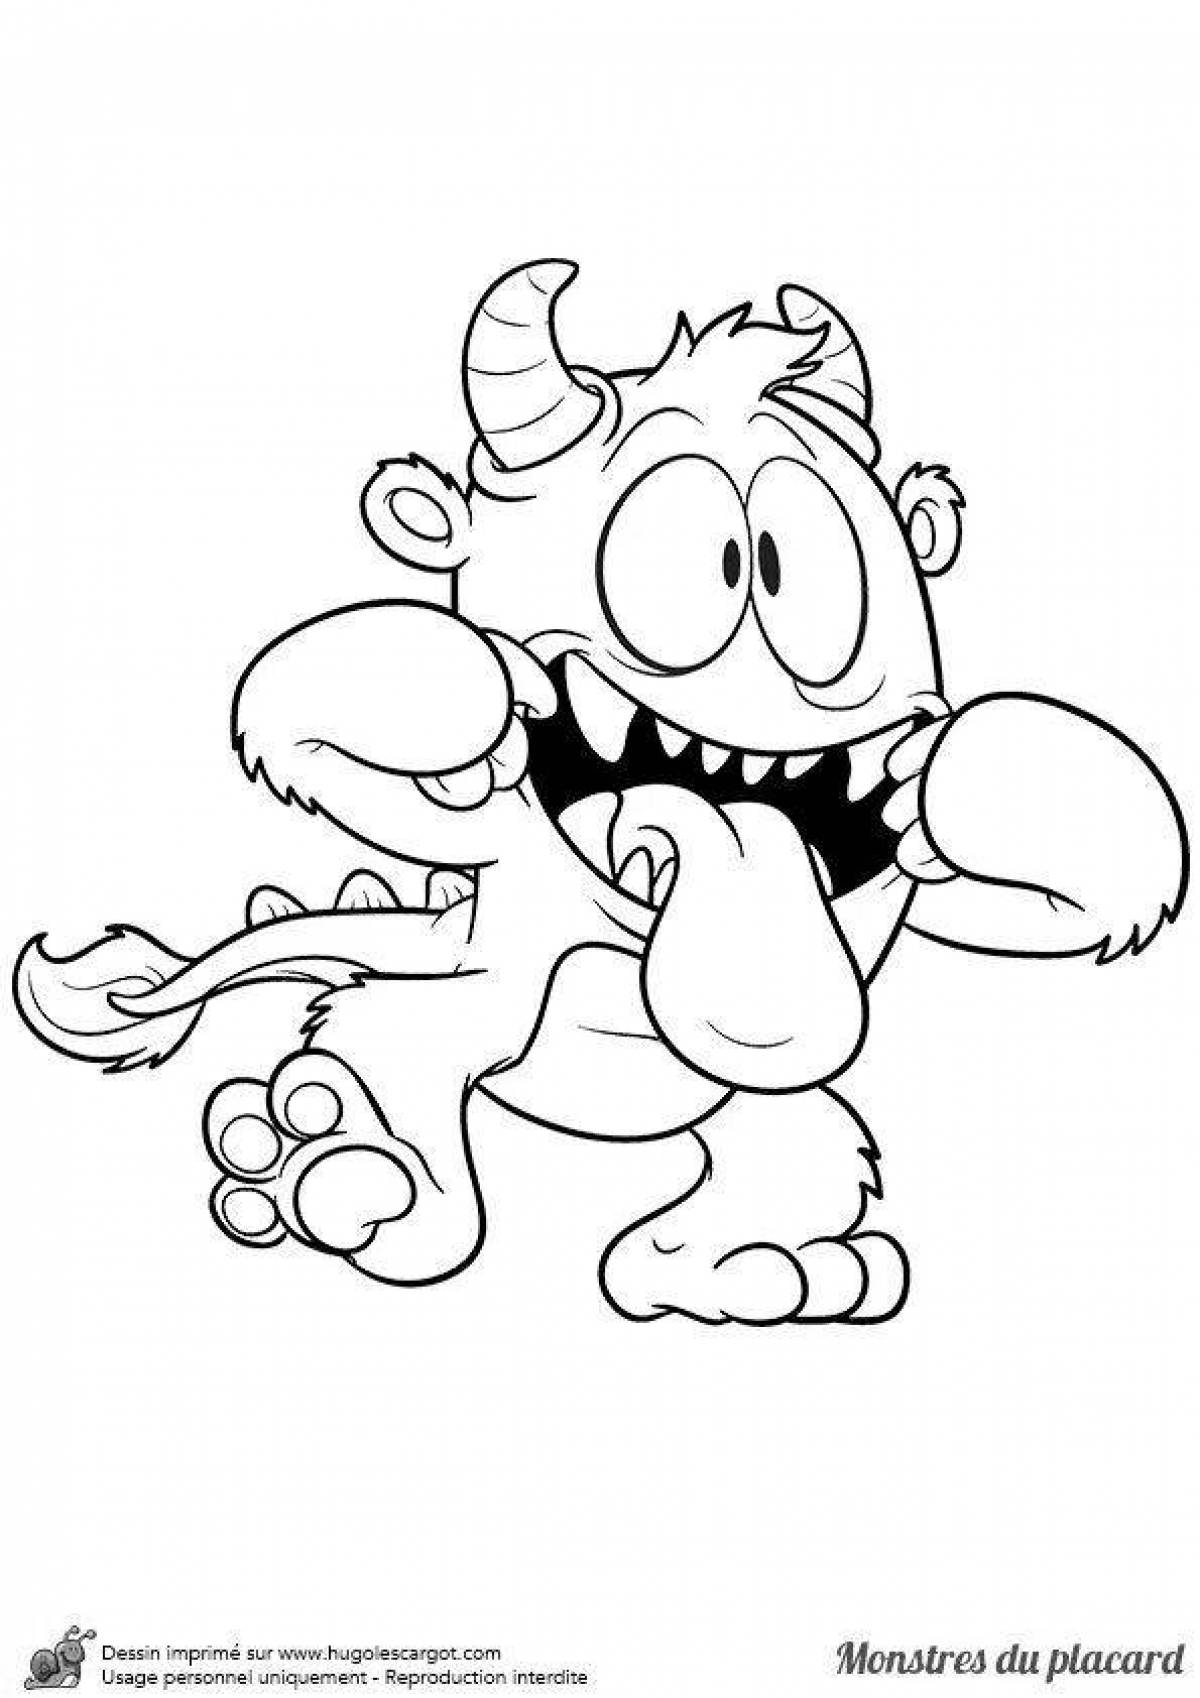 Terrifying monster coloring page